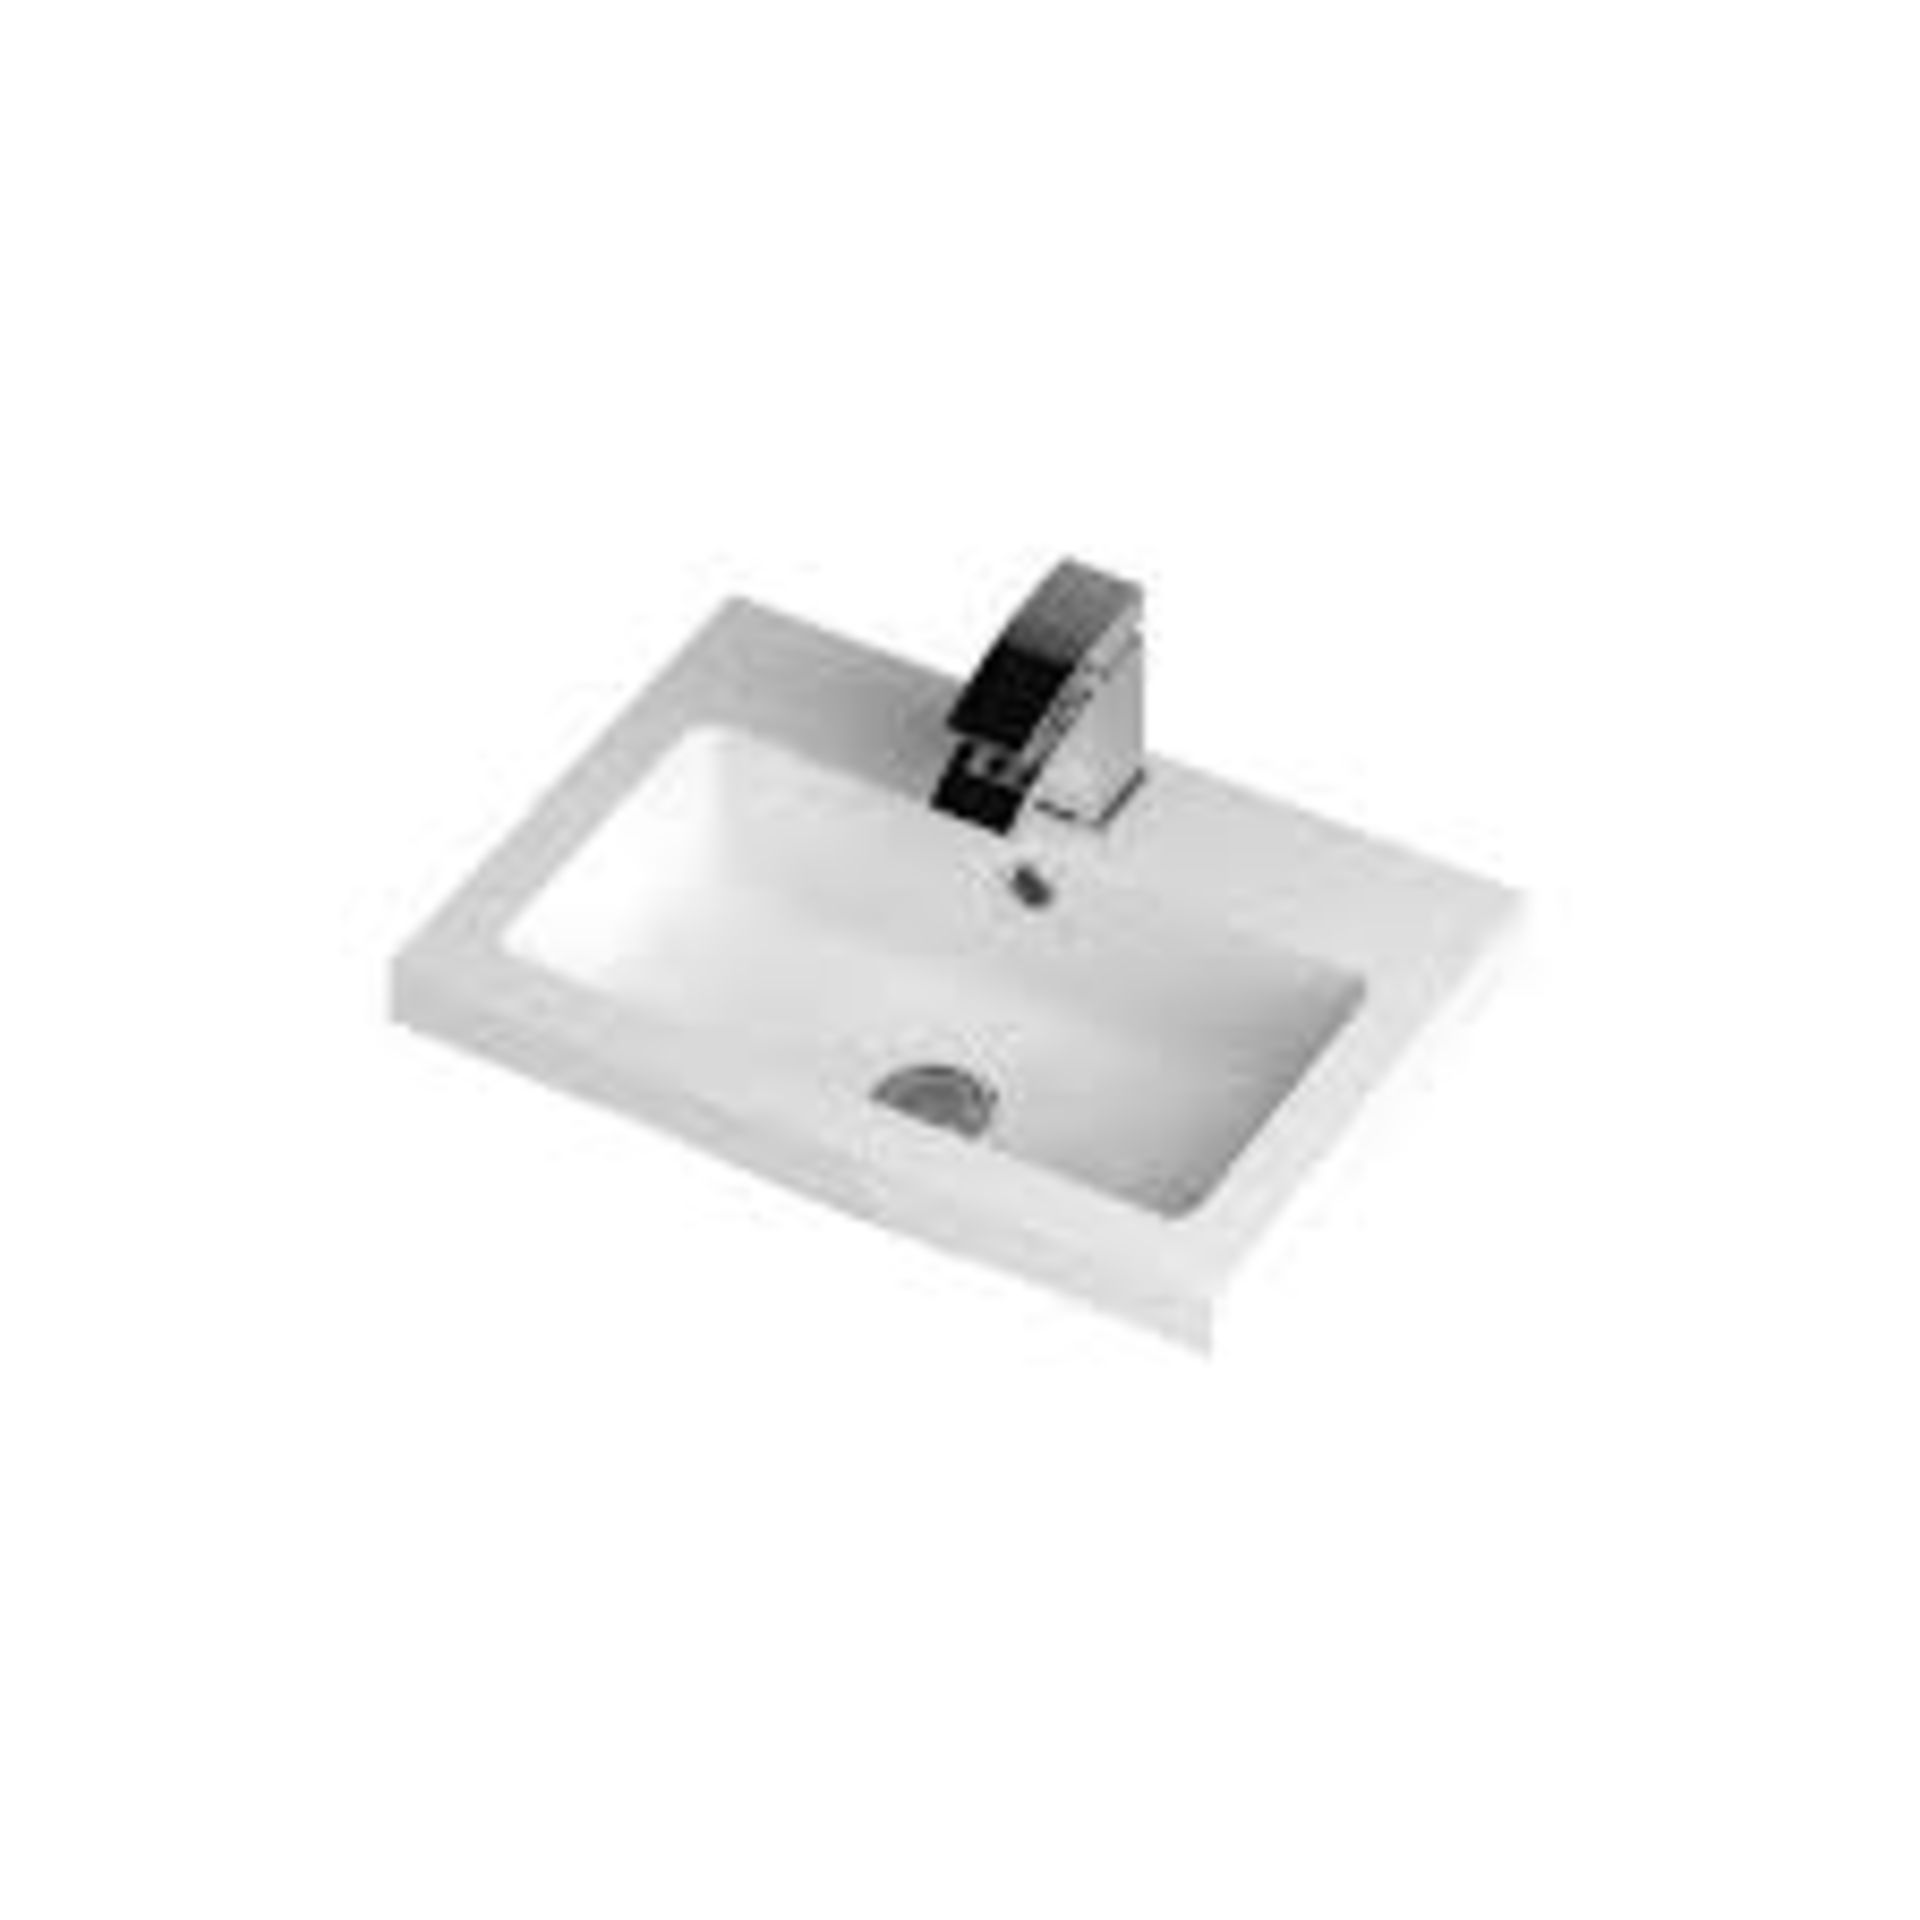 Boxed 500ml Rear Tap Basin (Public Viewing and Appraisals Available)